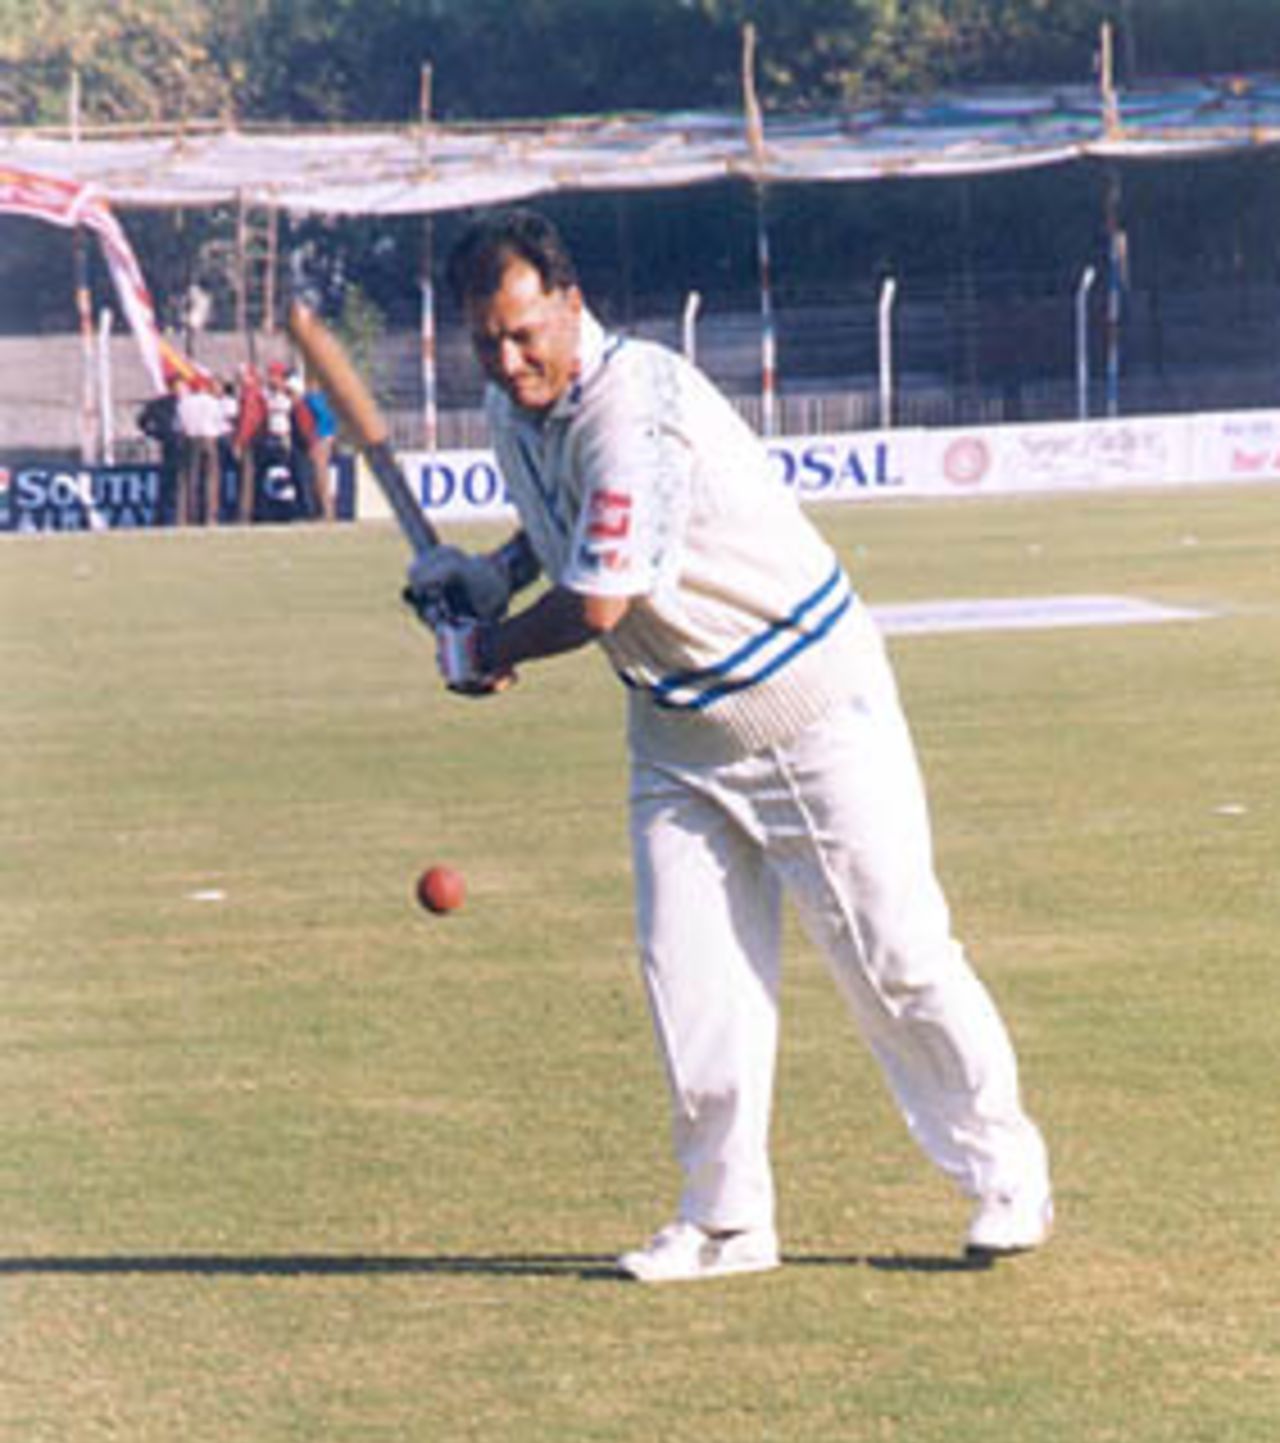 FedEx Cup 1999, Second OD: Madan Lal practising before the match